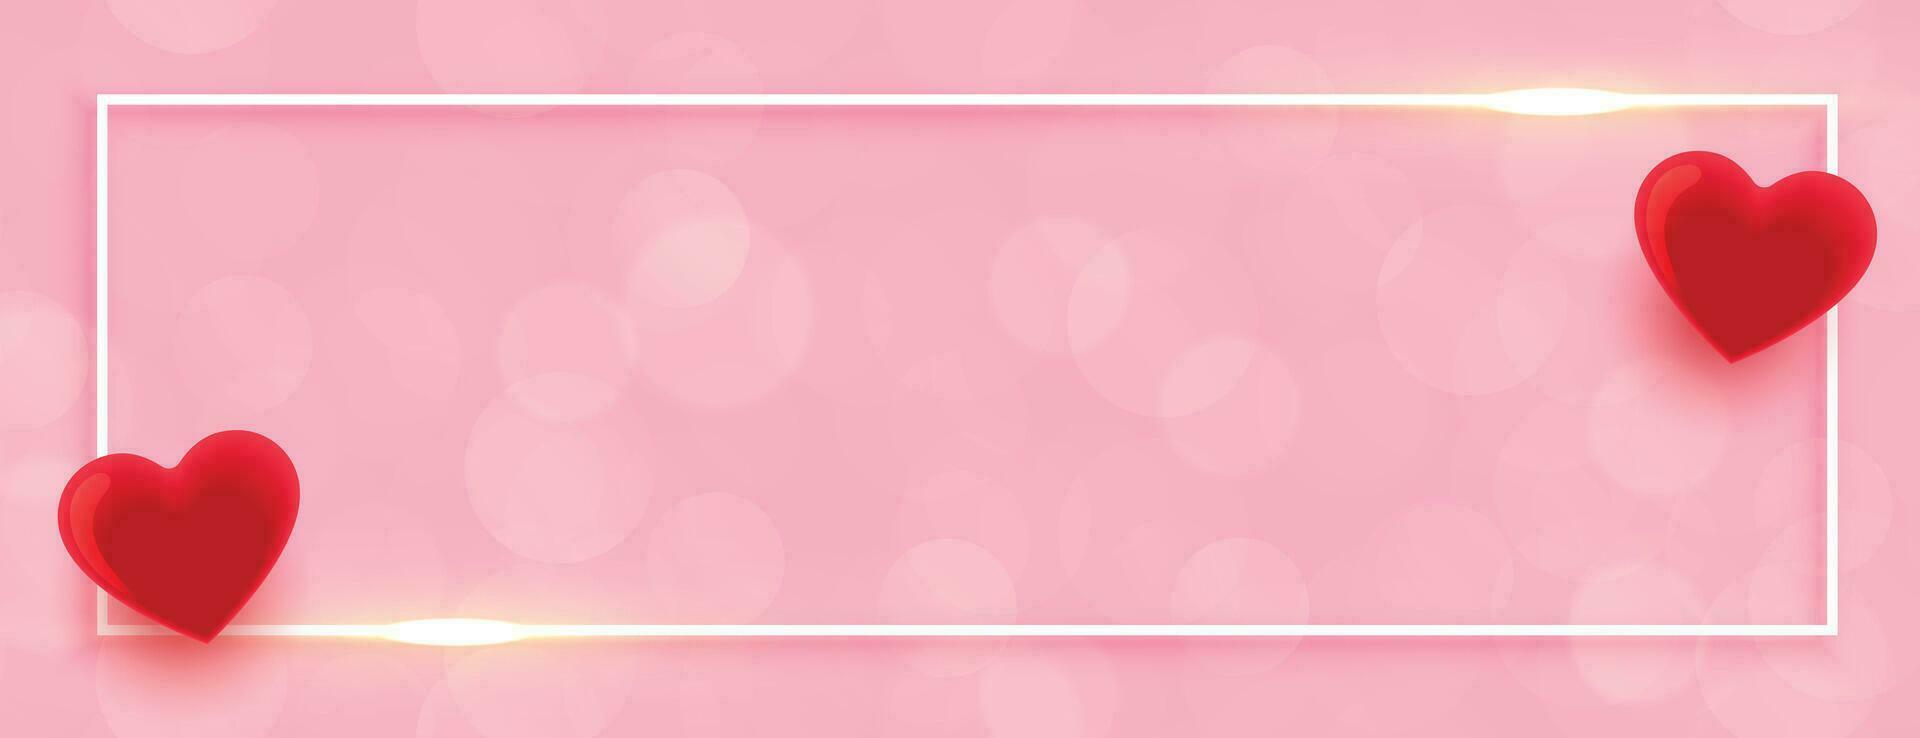 happy valentines day wide frame with text space vector